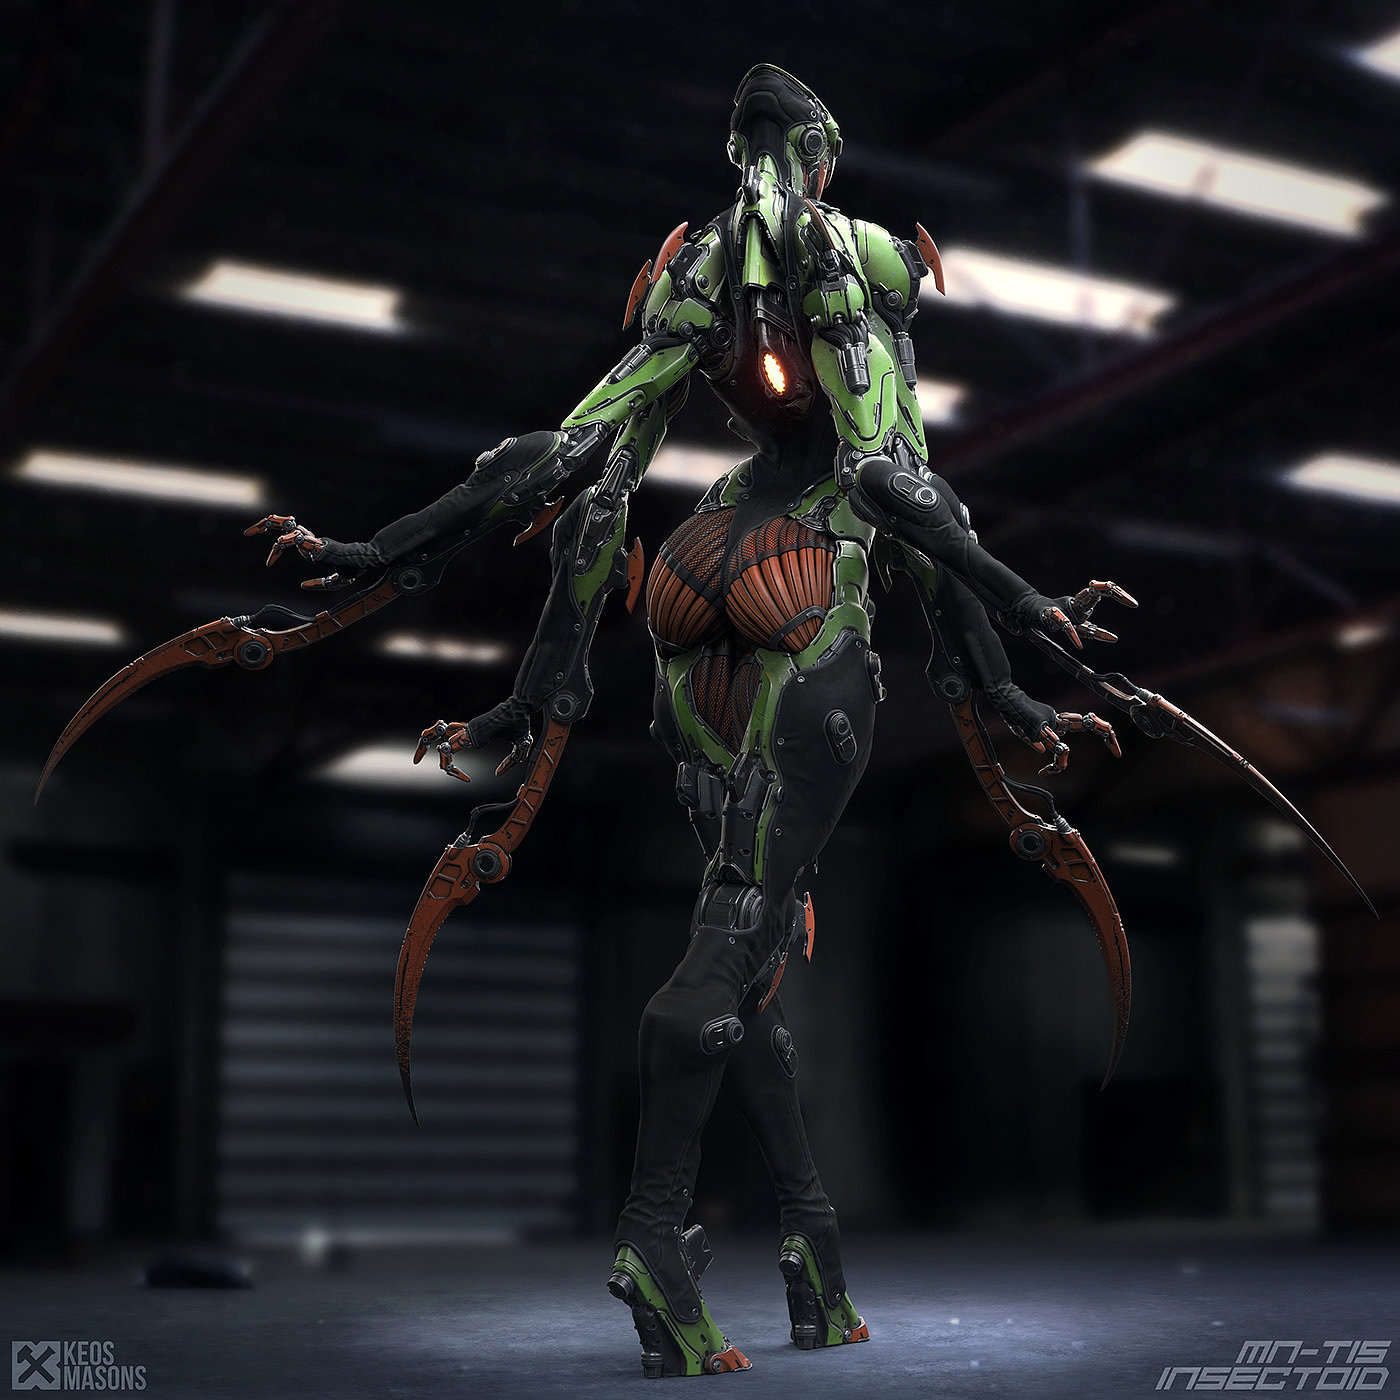 M.N.-T15 / Insectoid，人物设计，玩具设计，3D艺术，